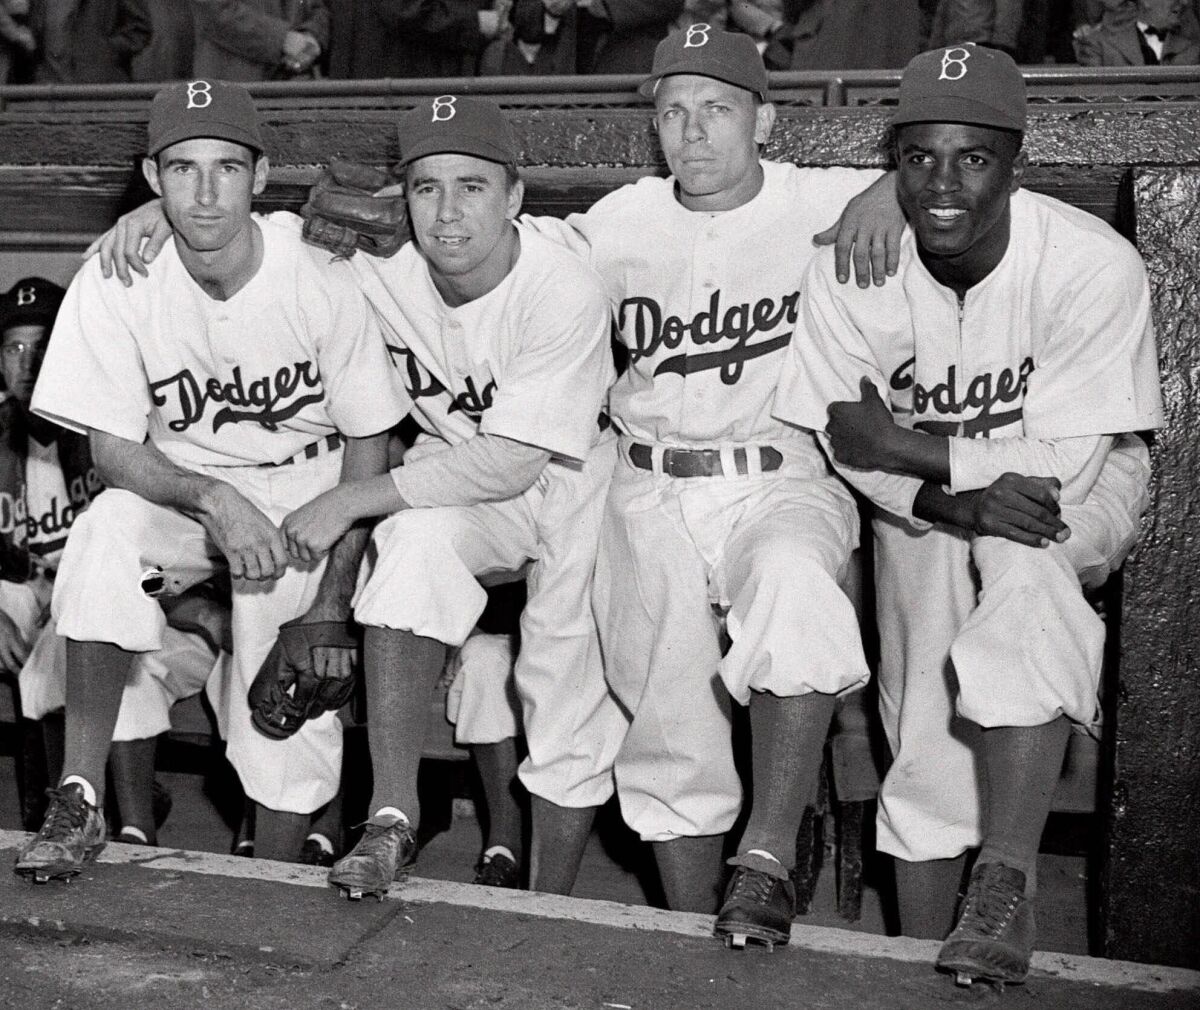 Brooklyn Dodgers players, from left, John Jorgensen, Pee Wee Reese, Ed Stanky and Jackie Robinson on April 15, 1947.